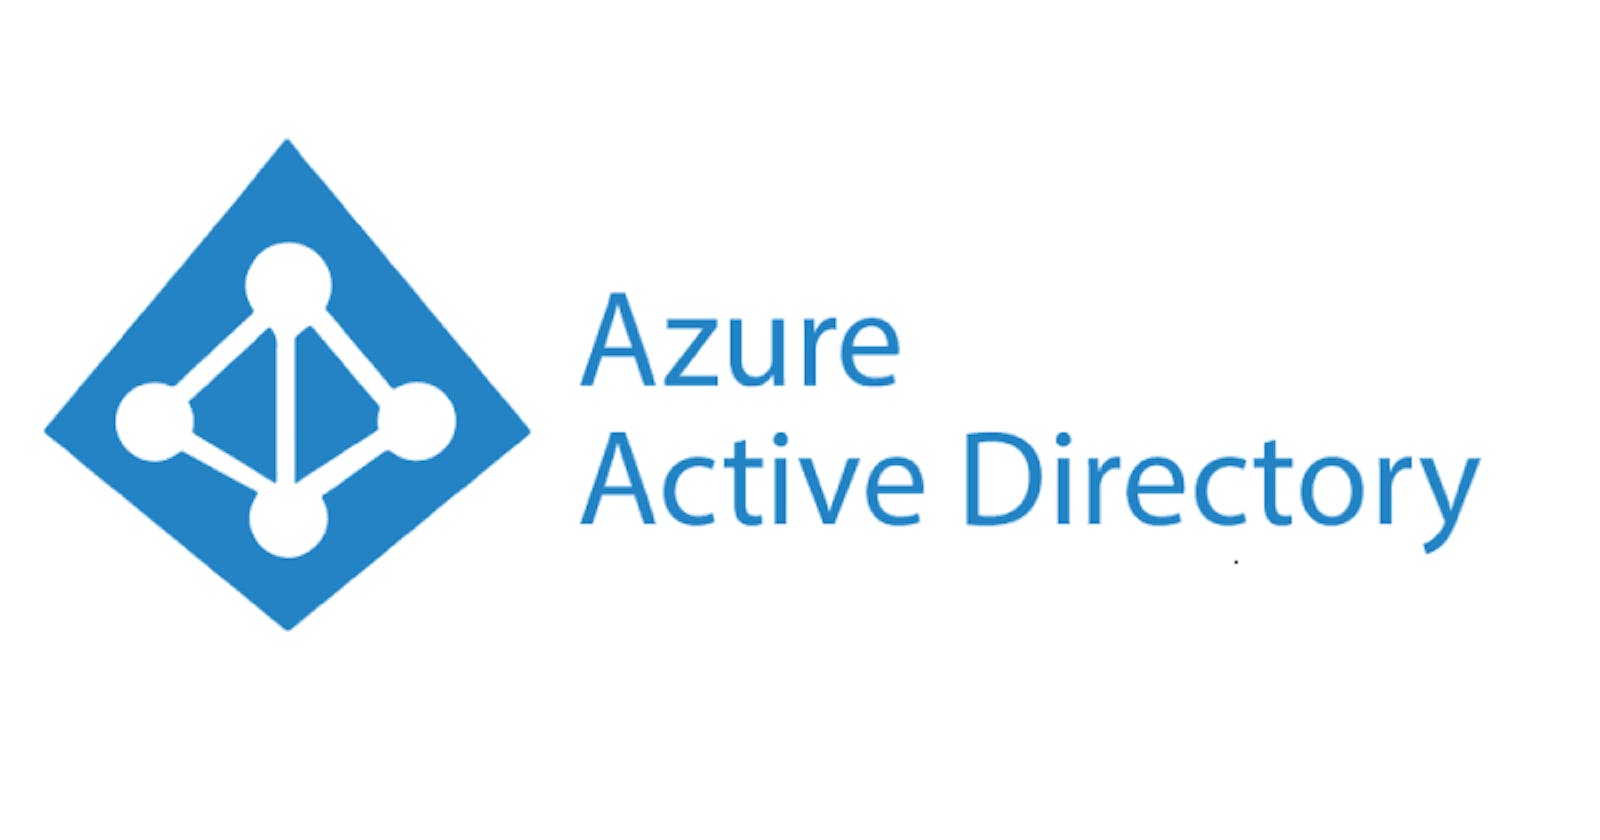 Setting the user.request object to an Azure AD user